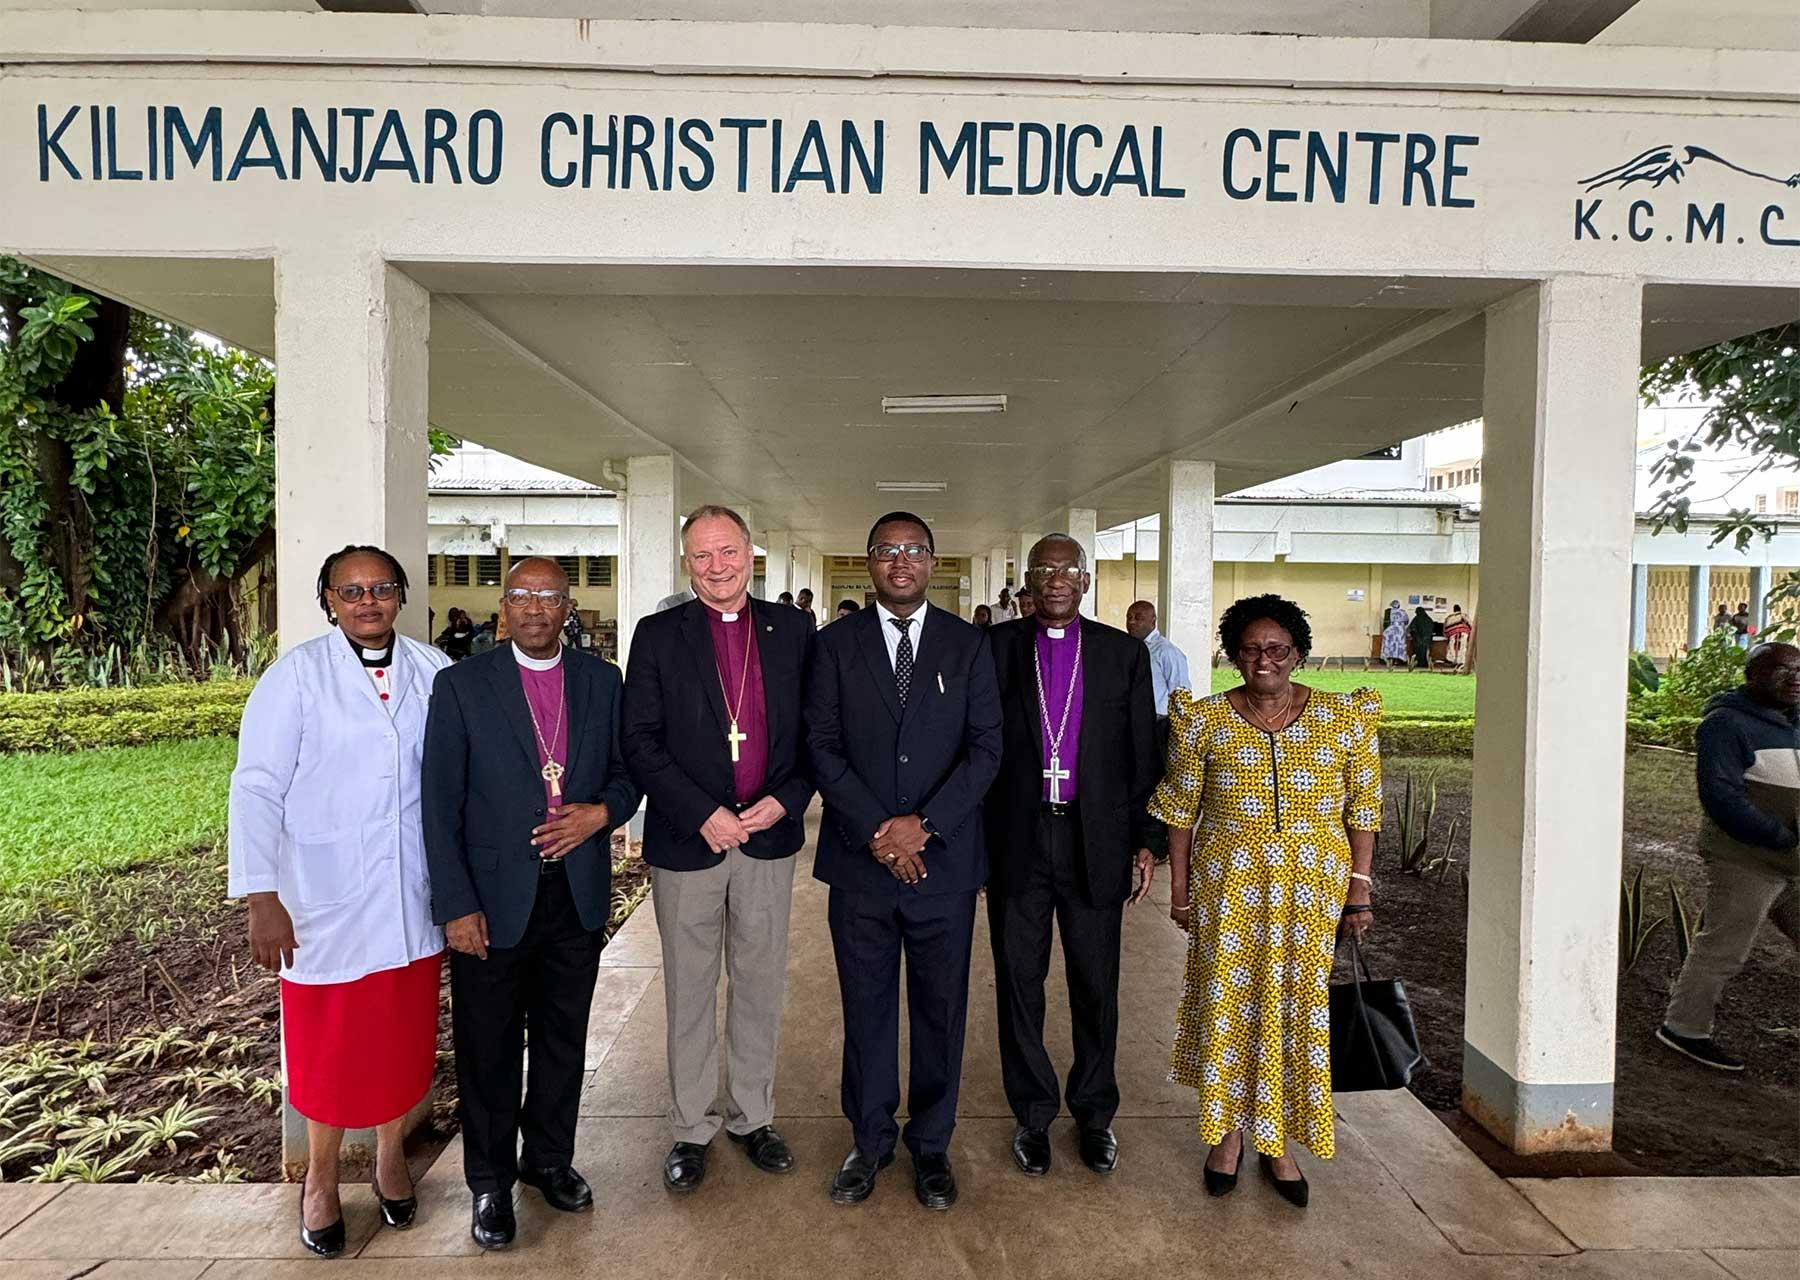 The Kilimanjaro Christian Medical Centre is part of a network of 24 hospitals and 148 health facilities that are run by the ELCT. Photo: LWF/A.Danielsson